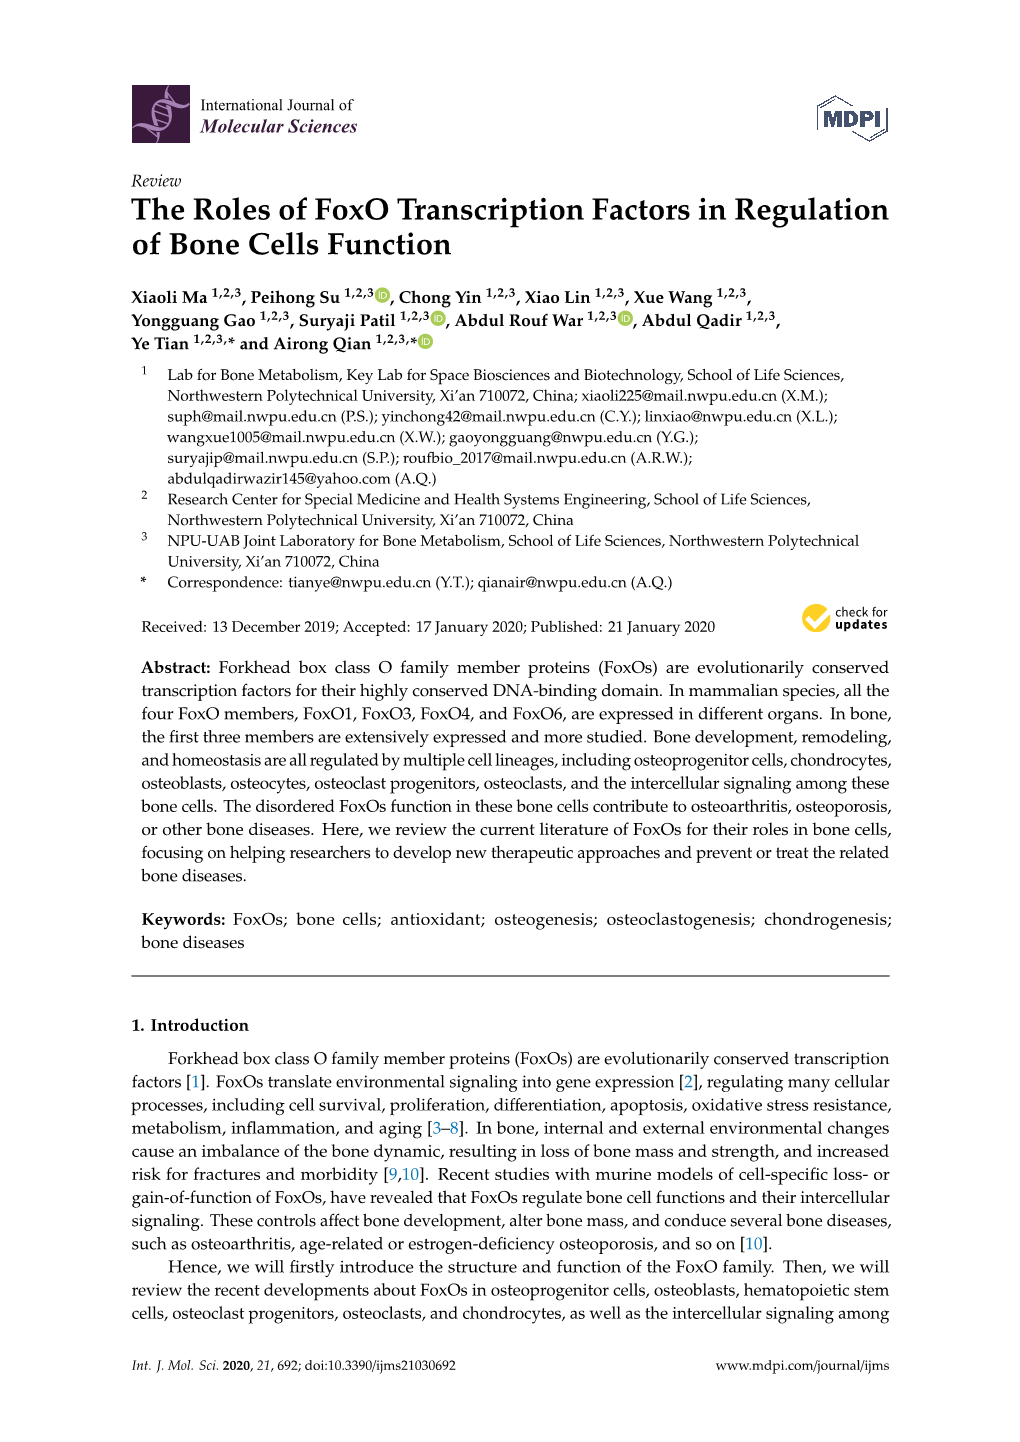 The Roles of Foxo Transcription Factors in Regulation of Bone Cells Function